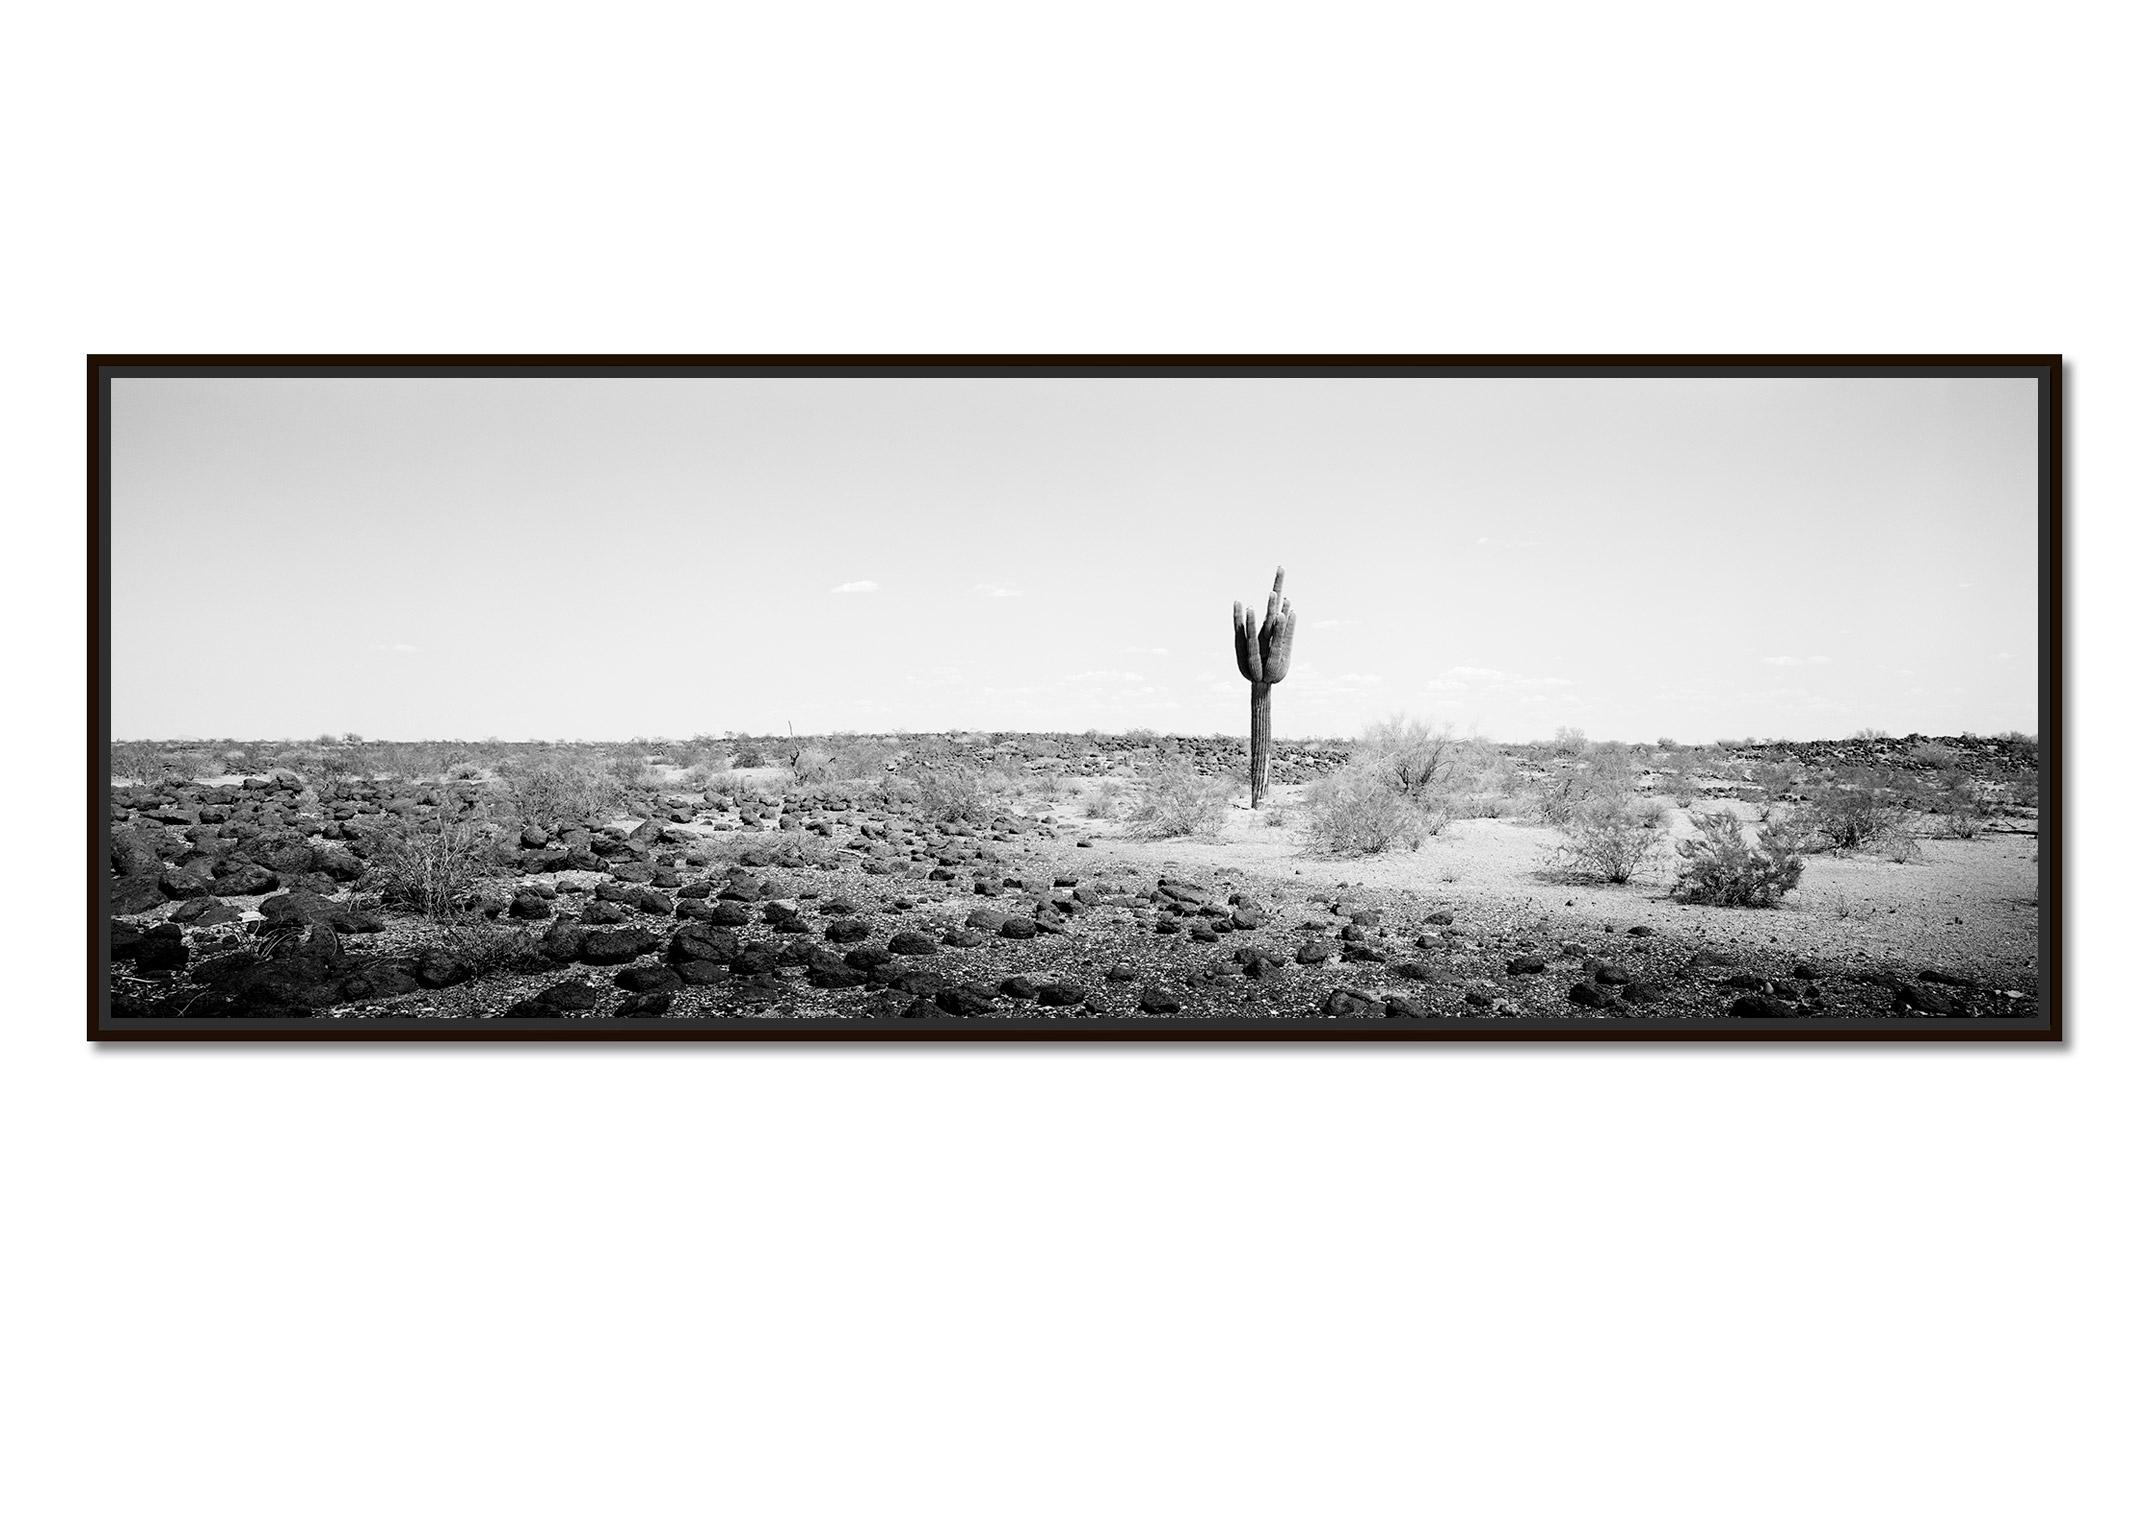 The last One Panorama, Cactus, AZ, USA, black and white photography, landscape - Photograph by Gerald Berghammer